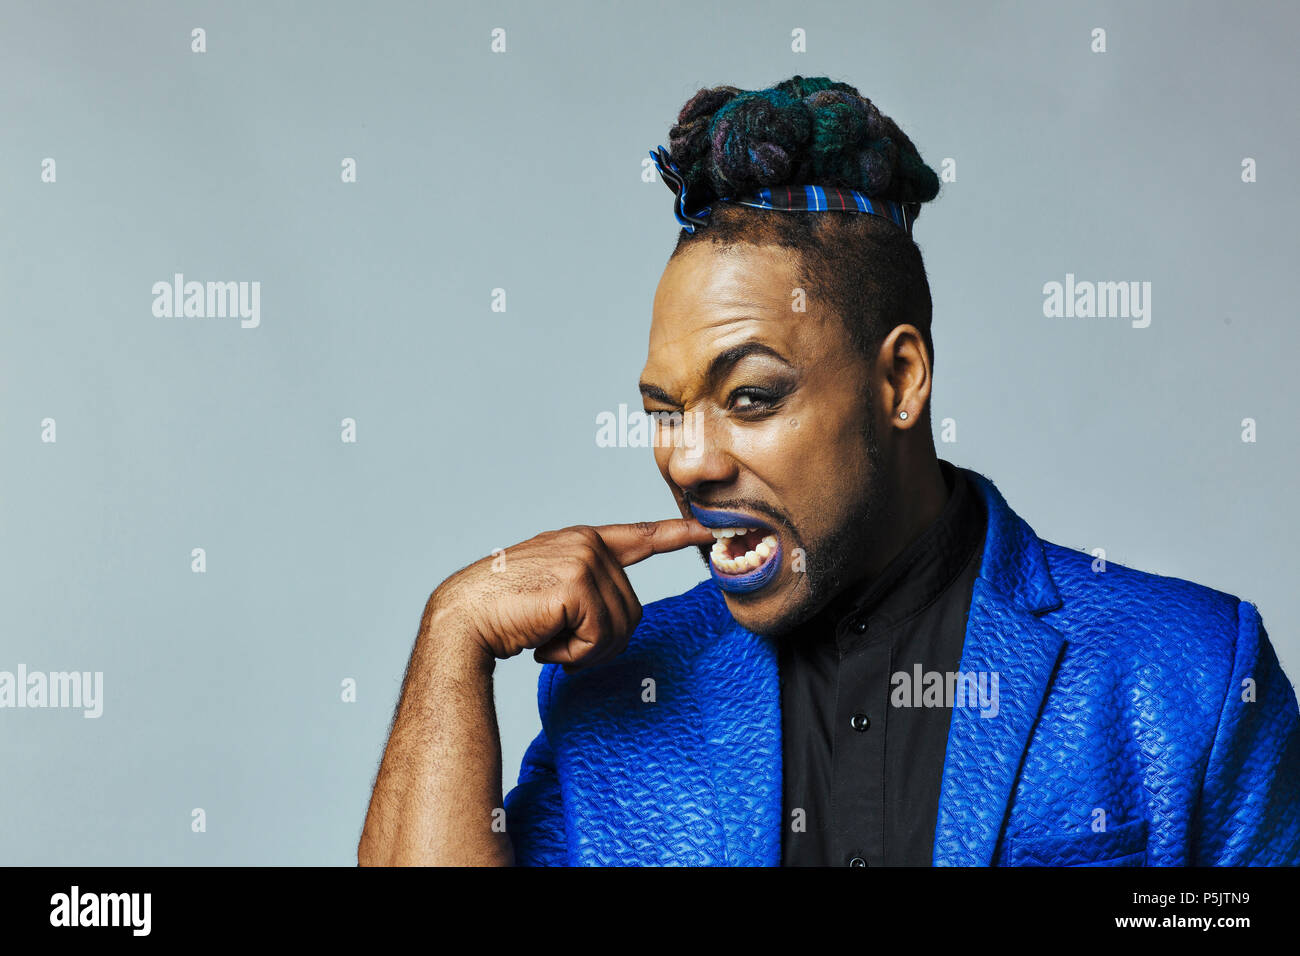 Portrait of a man in blue jacket and blue lips biting his finger Stock Photo